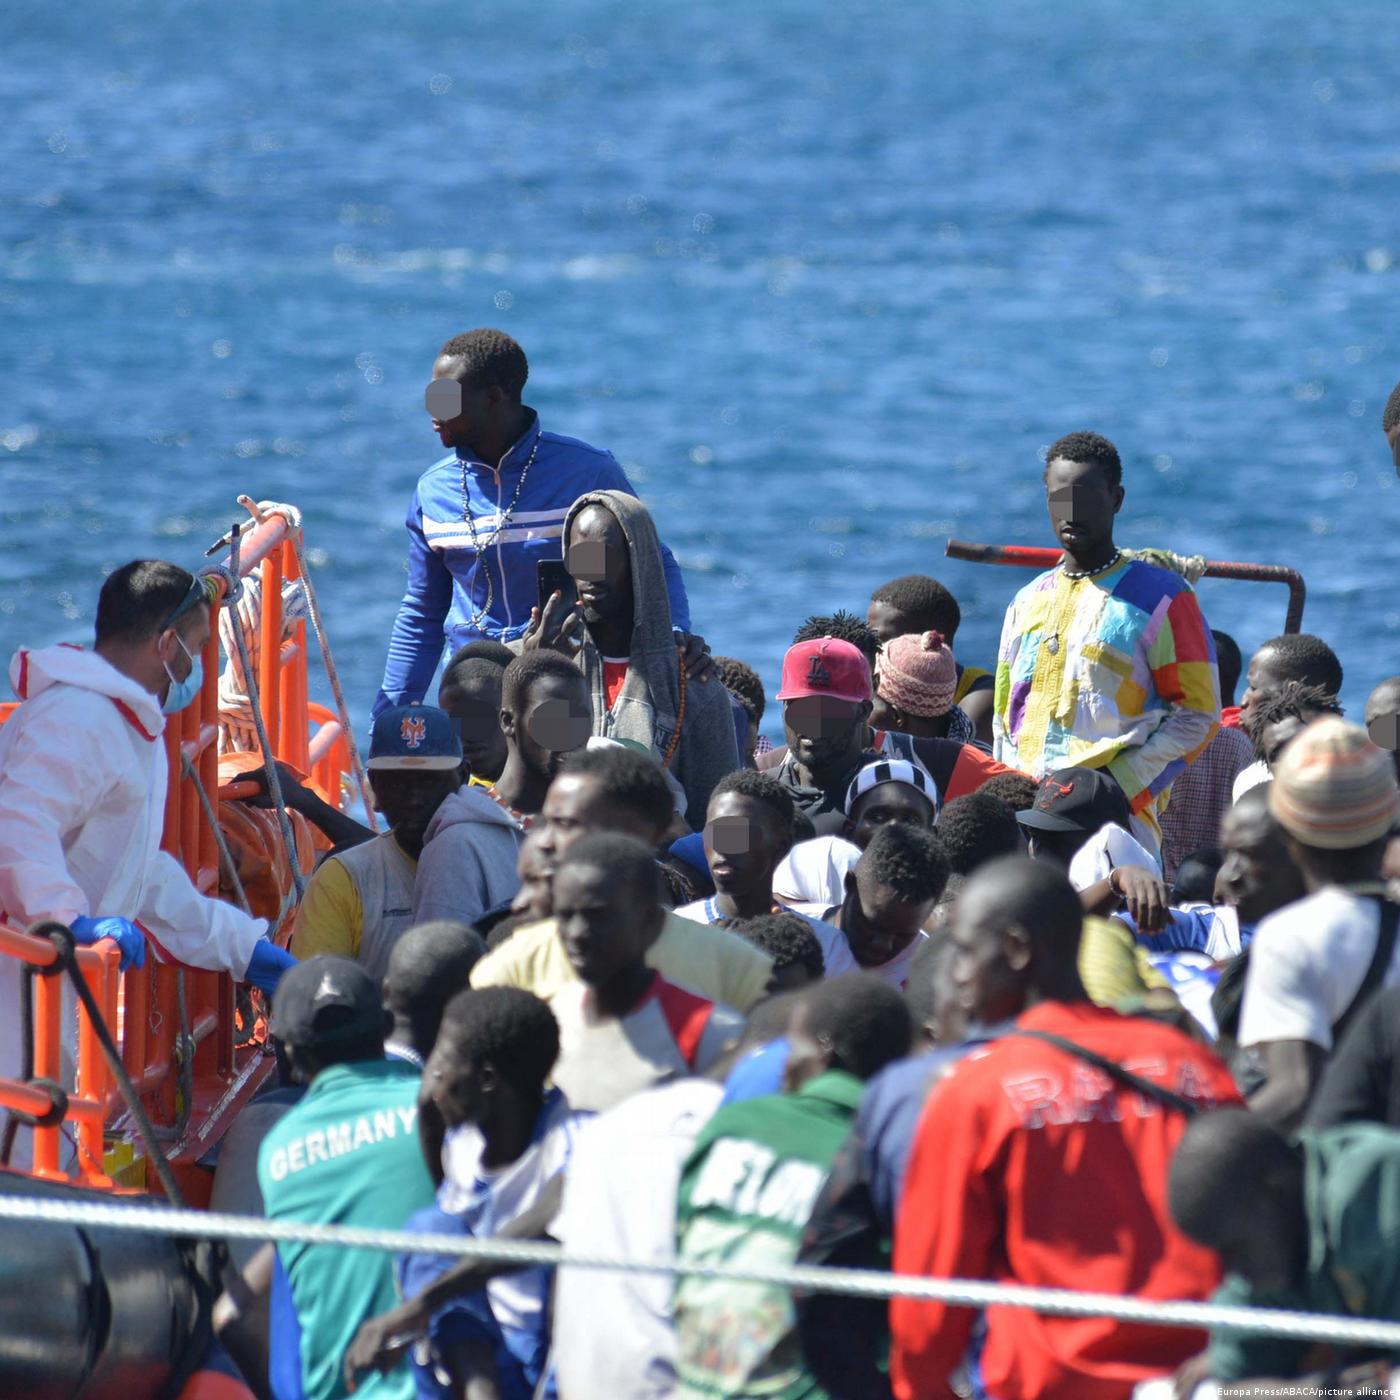 Record number of Africans flee to Spain’s Canary Islands